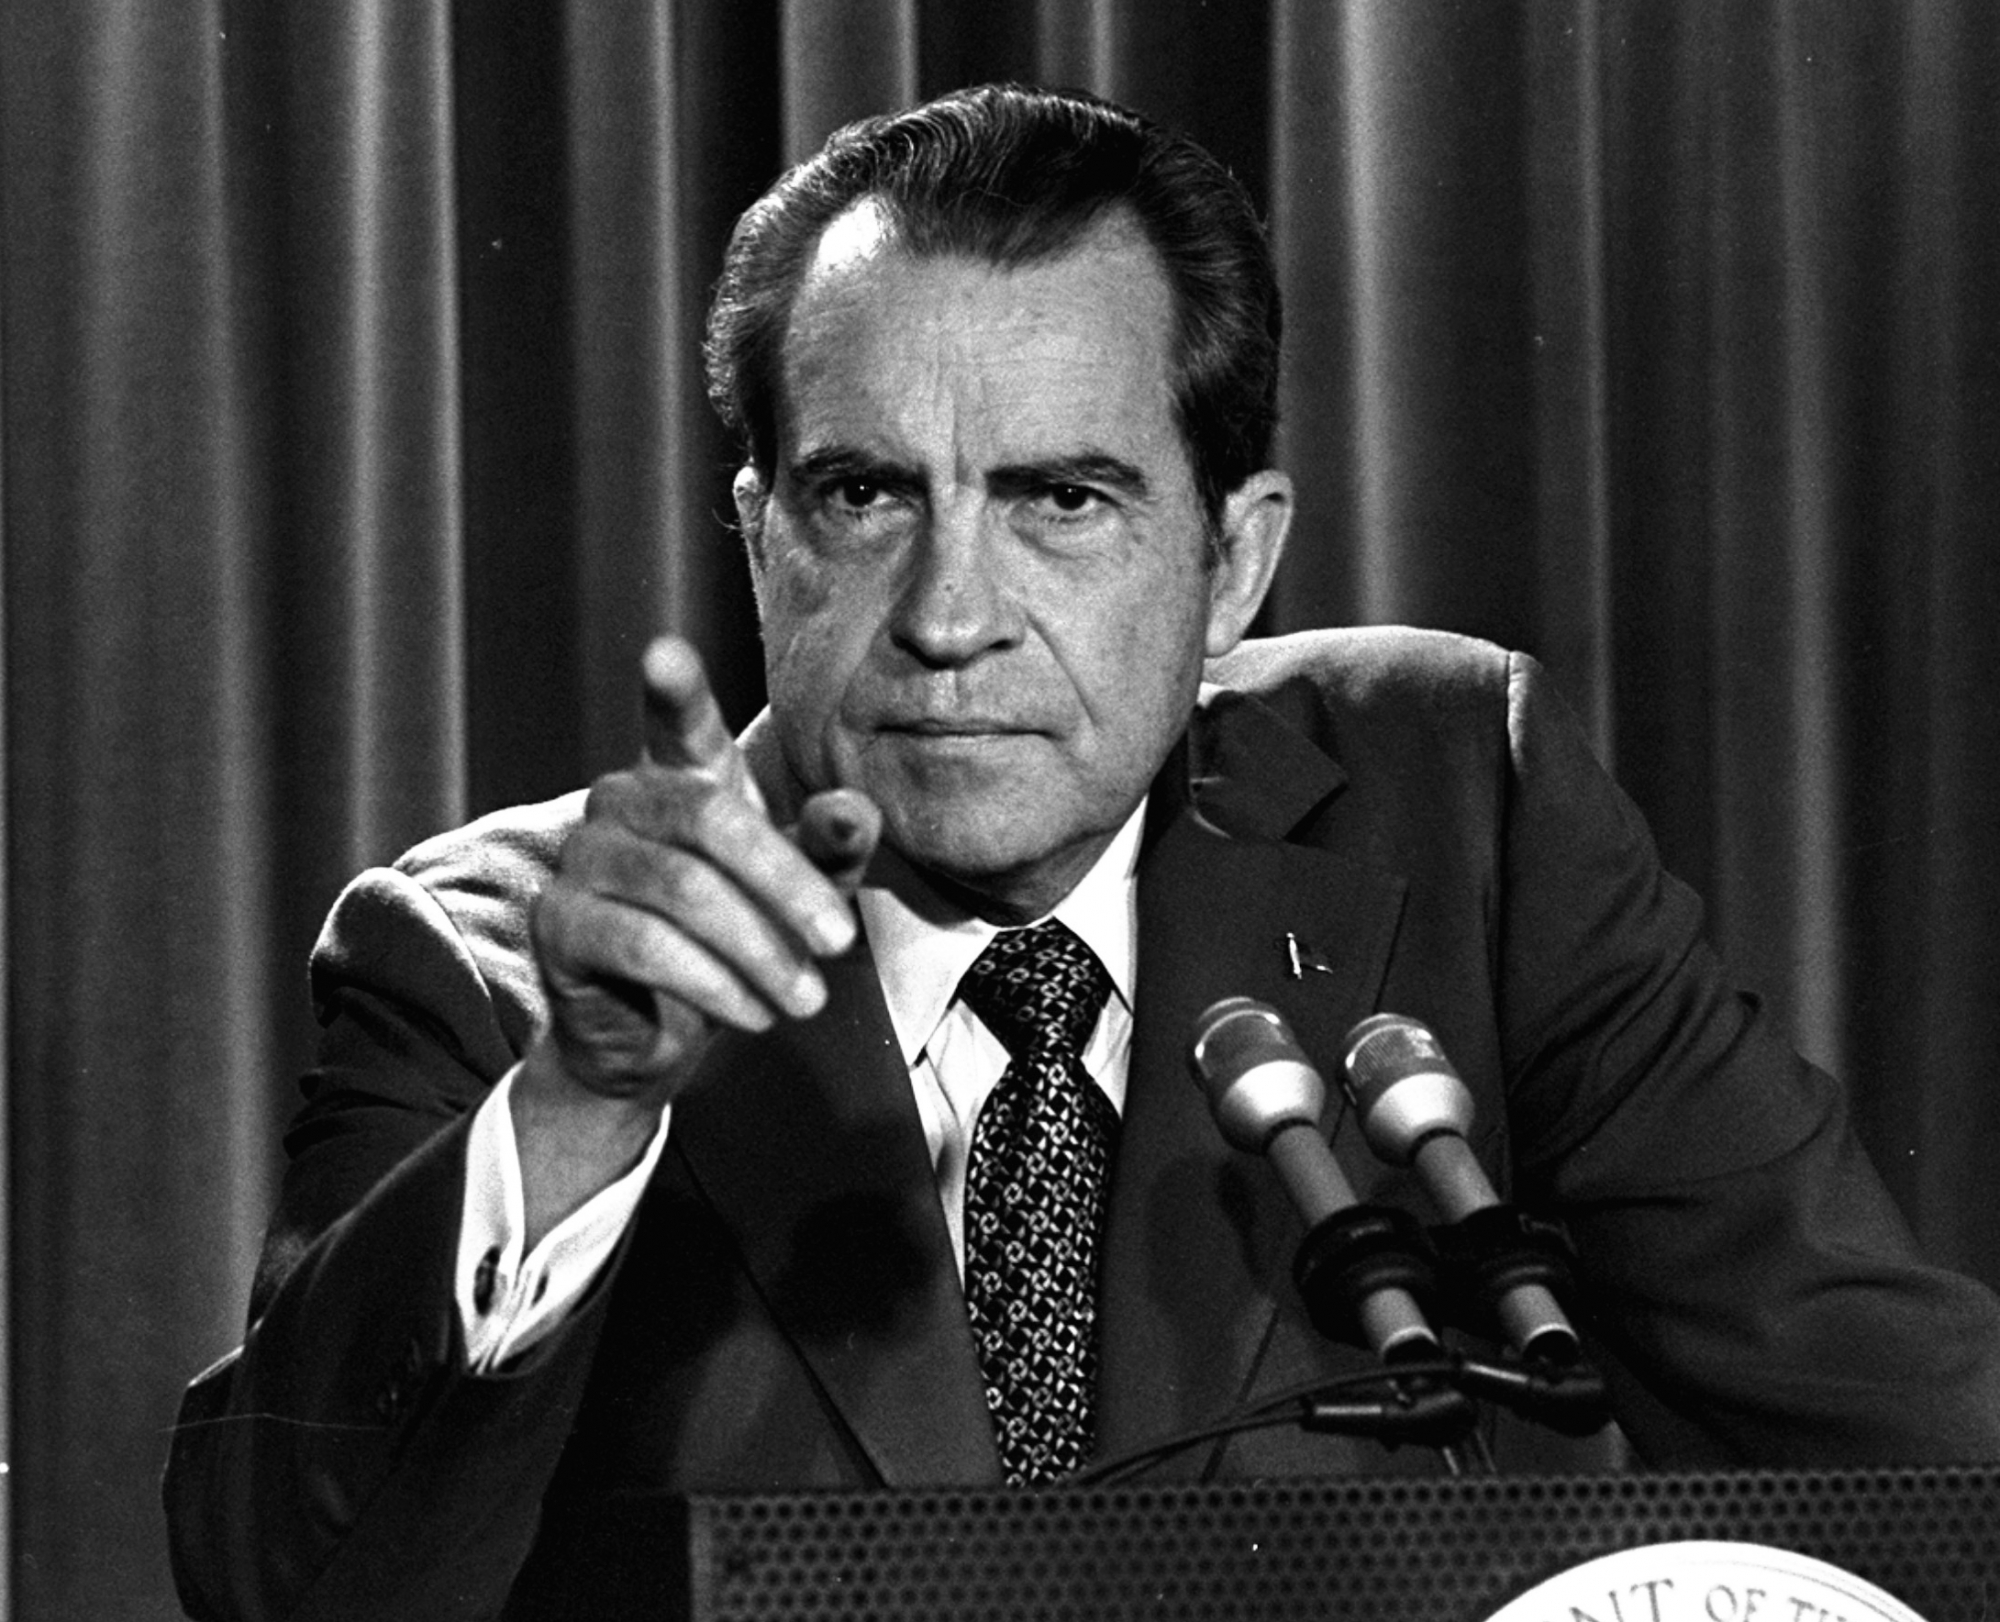 FILE - In this March 15, 1973, file photo President Nixon tells a White House news conference that he will not allow his legal counsel, John Dean, to testify on Capitol Hill in the Watergate investigation and challenged the Senate to test him in the Supreme Court. A feisty Nixon defended his shredded legacy and Watergate-era actions in grand jury testimony that he thought would never come out. On Thursday, Nov. 10, 2011, it did. (AP Photo/Charles Tasnadi, File)